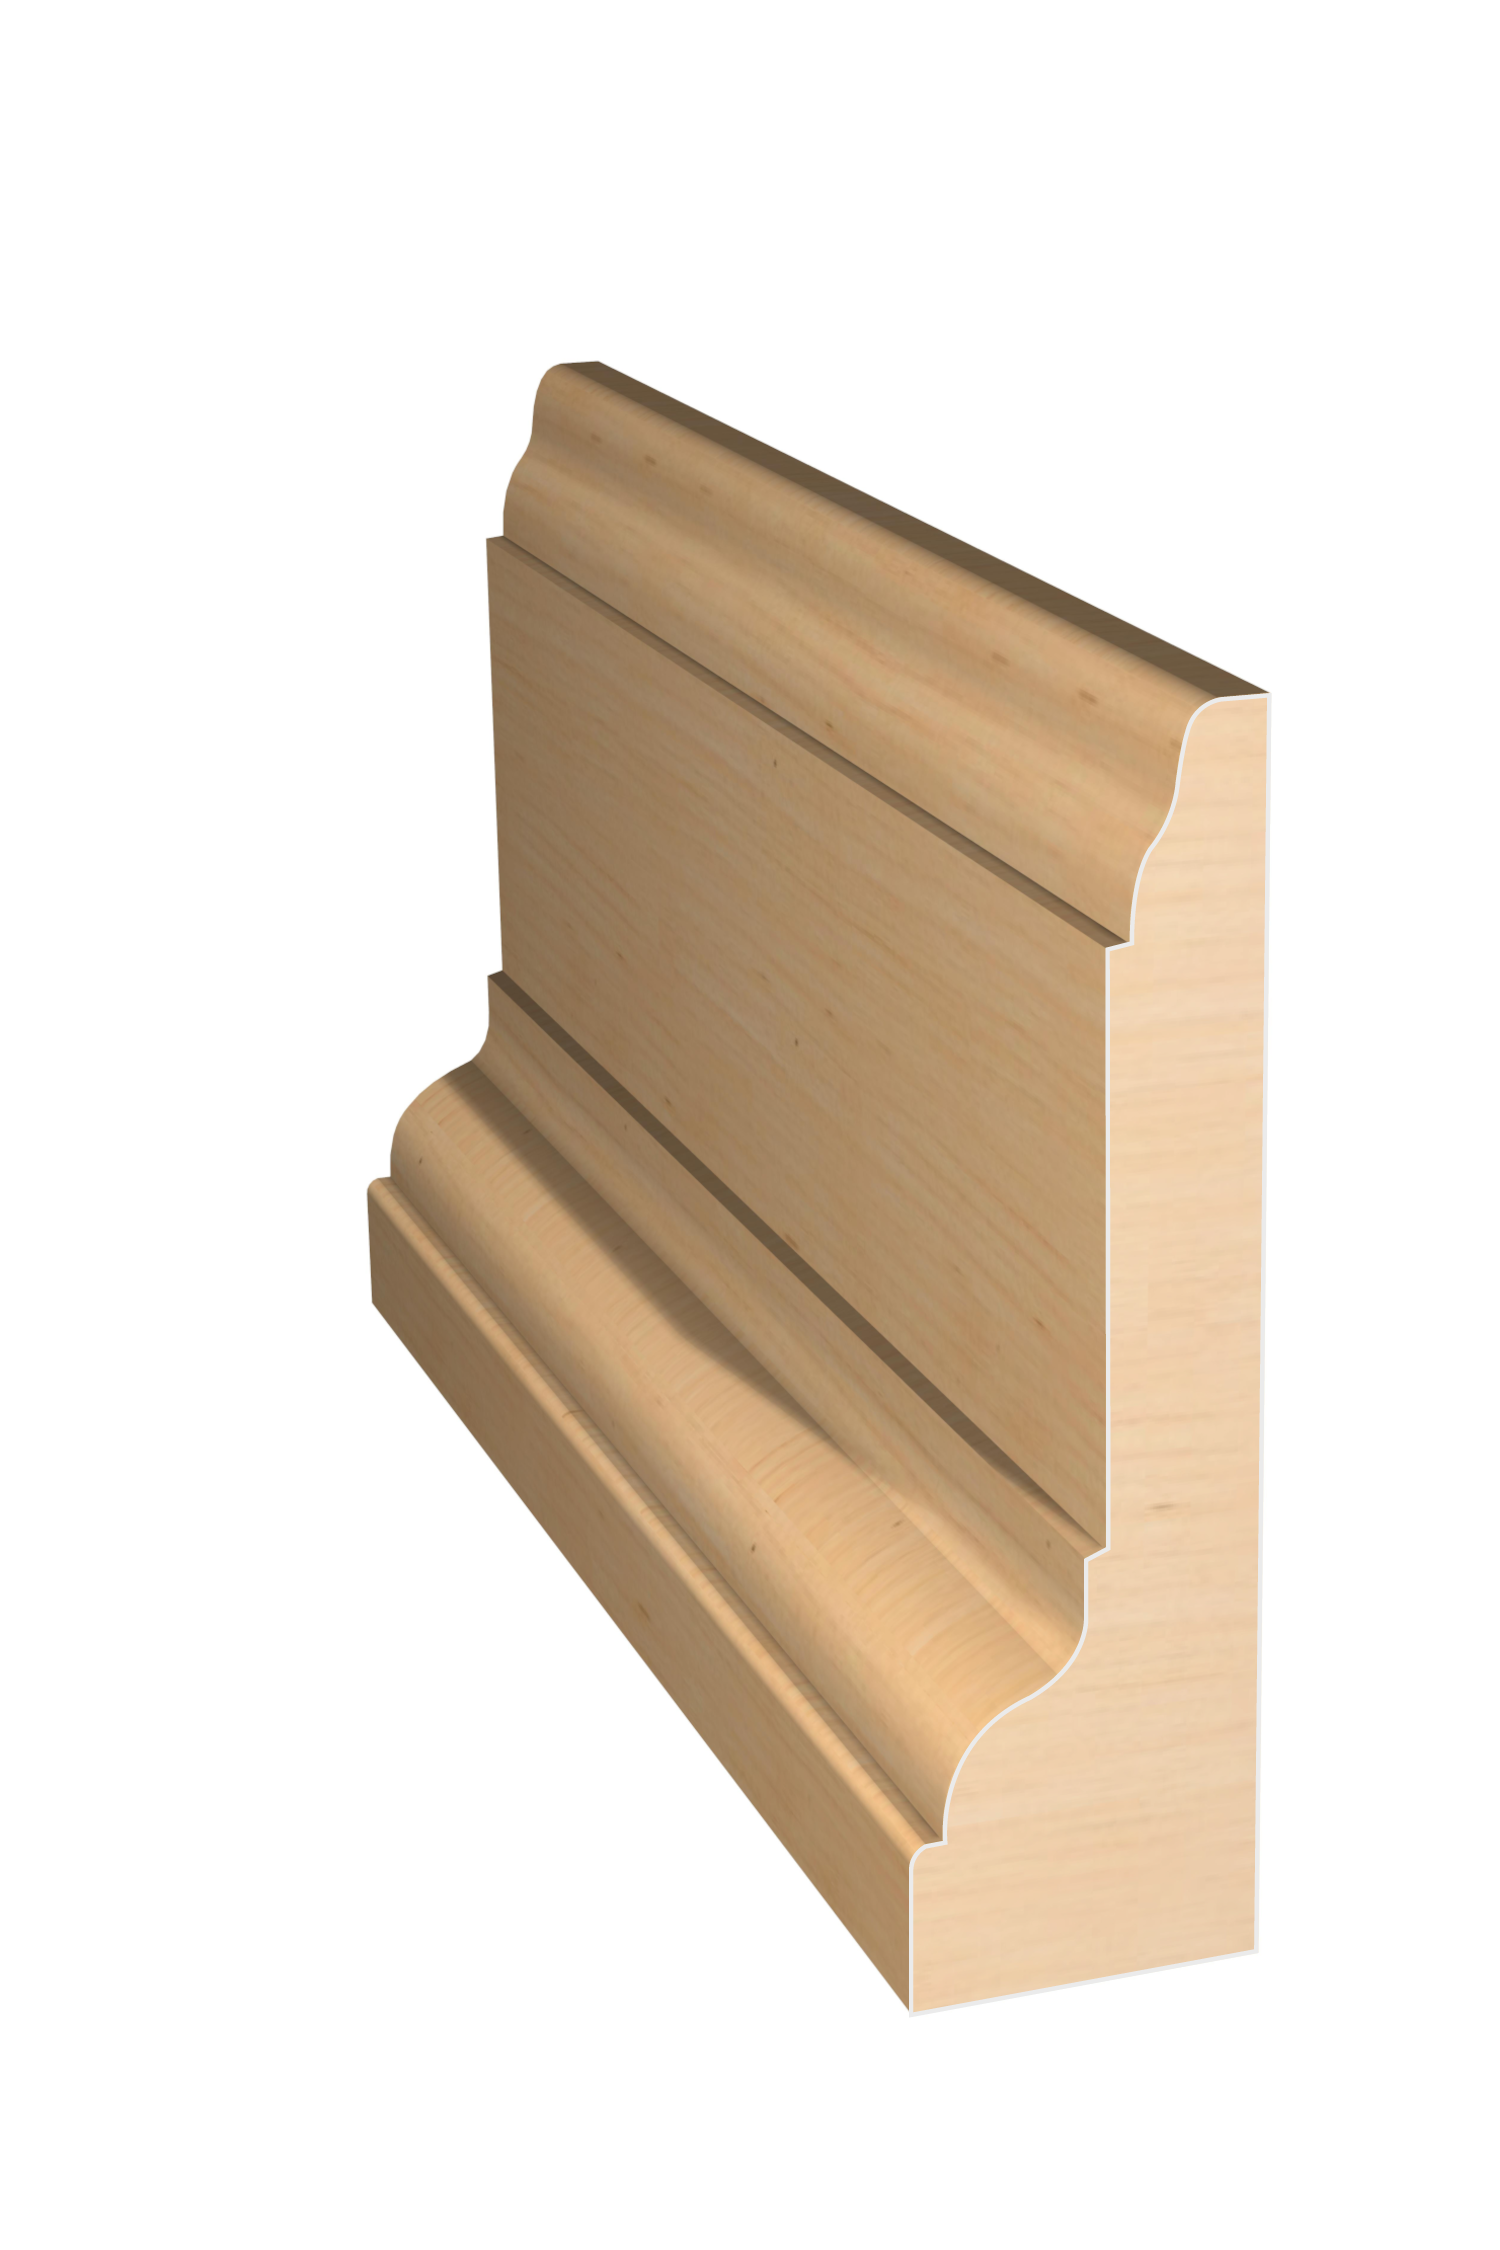 Three dimensional rendering of custom casing wood molding CAPL31240 made by Public Lumber Company in Detroit.